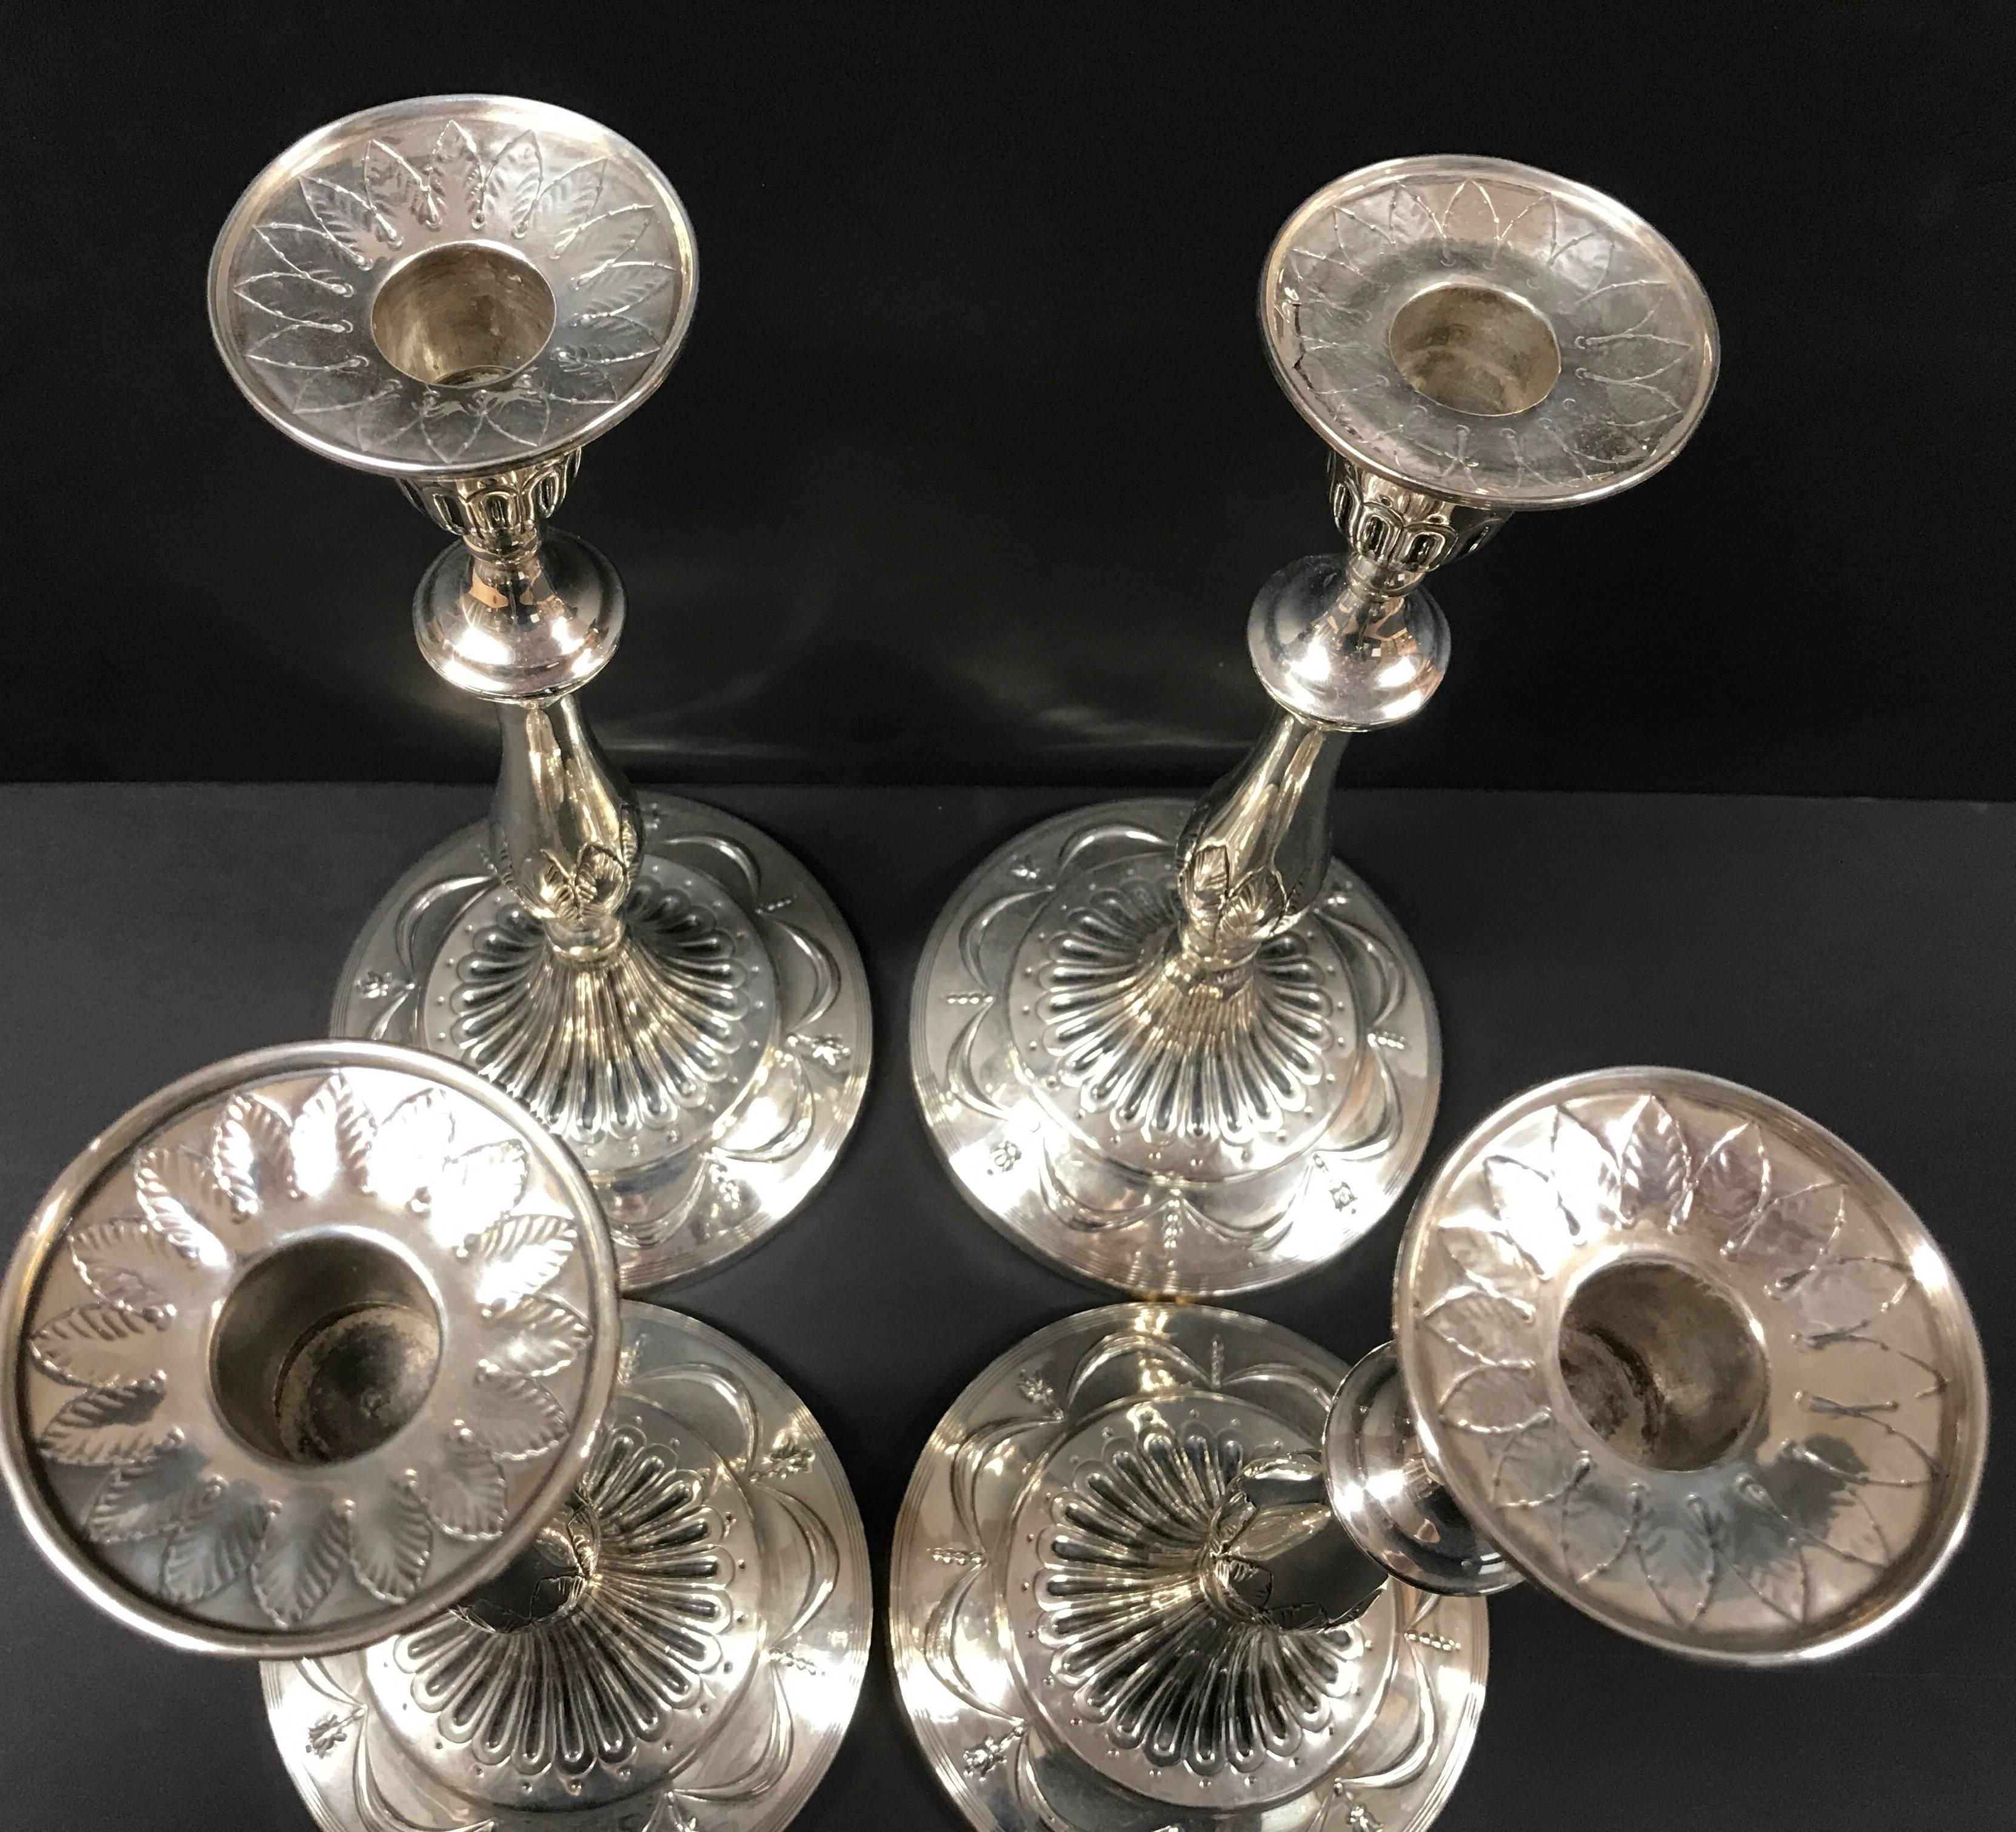 Amazing George III Sterling Silver  Set of four (4)  sterling silver candlesticks  c. 1799  Neoclassical style sterling silver candlesticks, fluted urn shaped sockets, repousse laurel leaf decoration to the round bobeches and standards, knopped